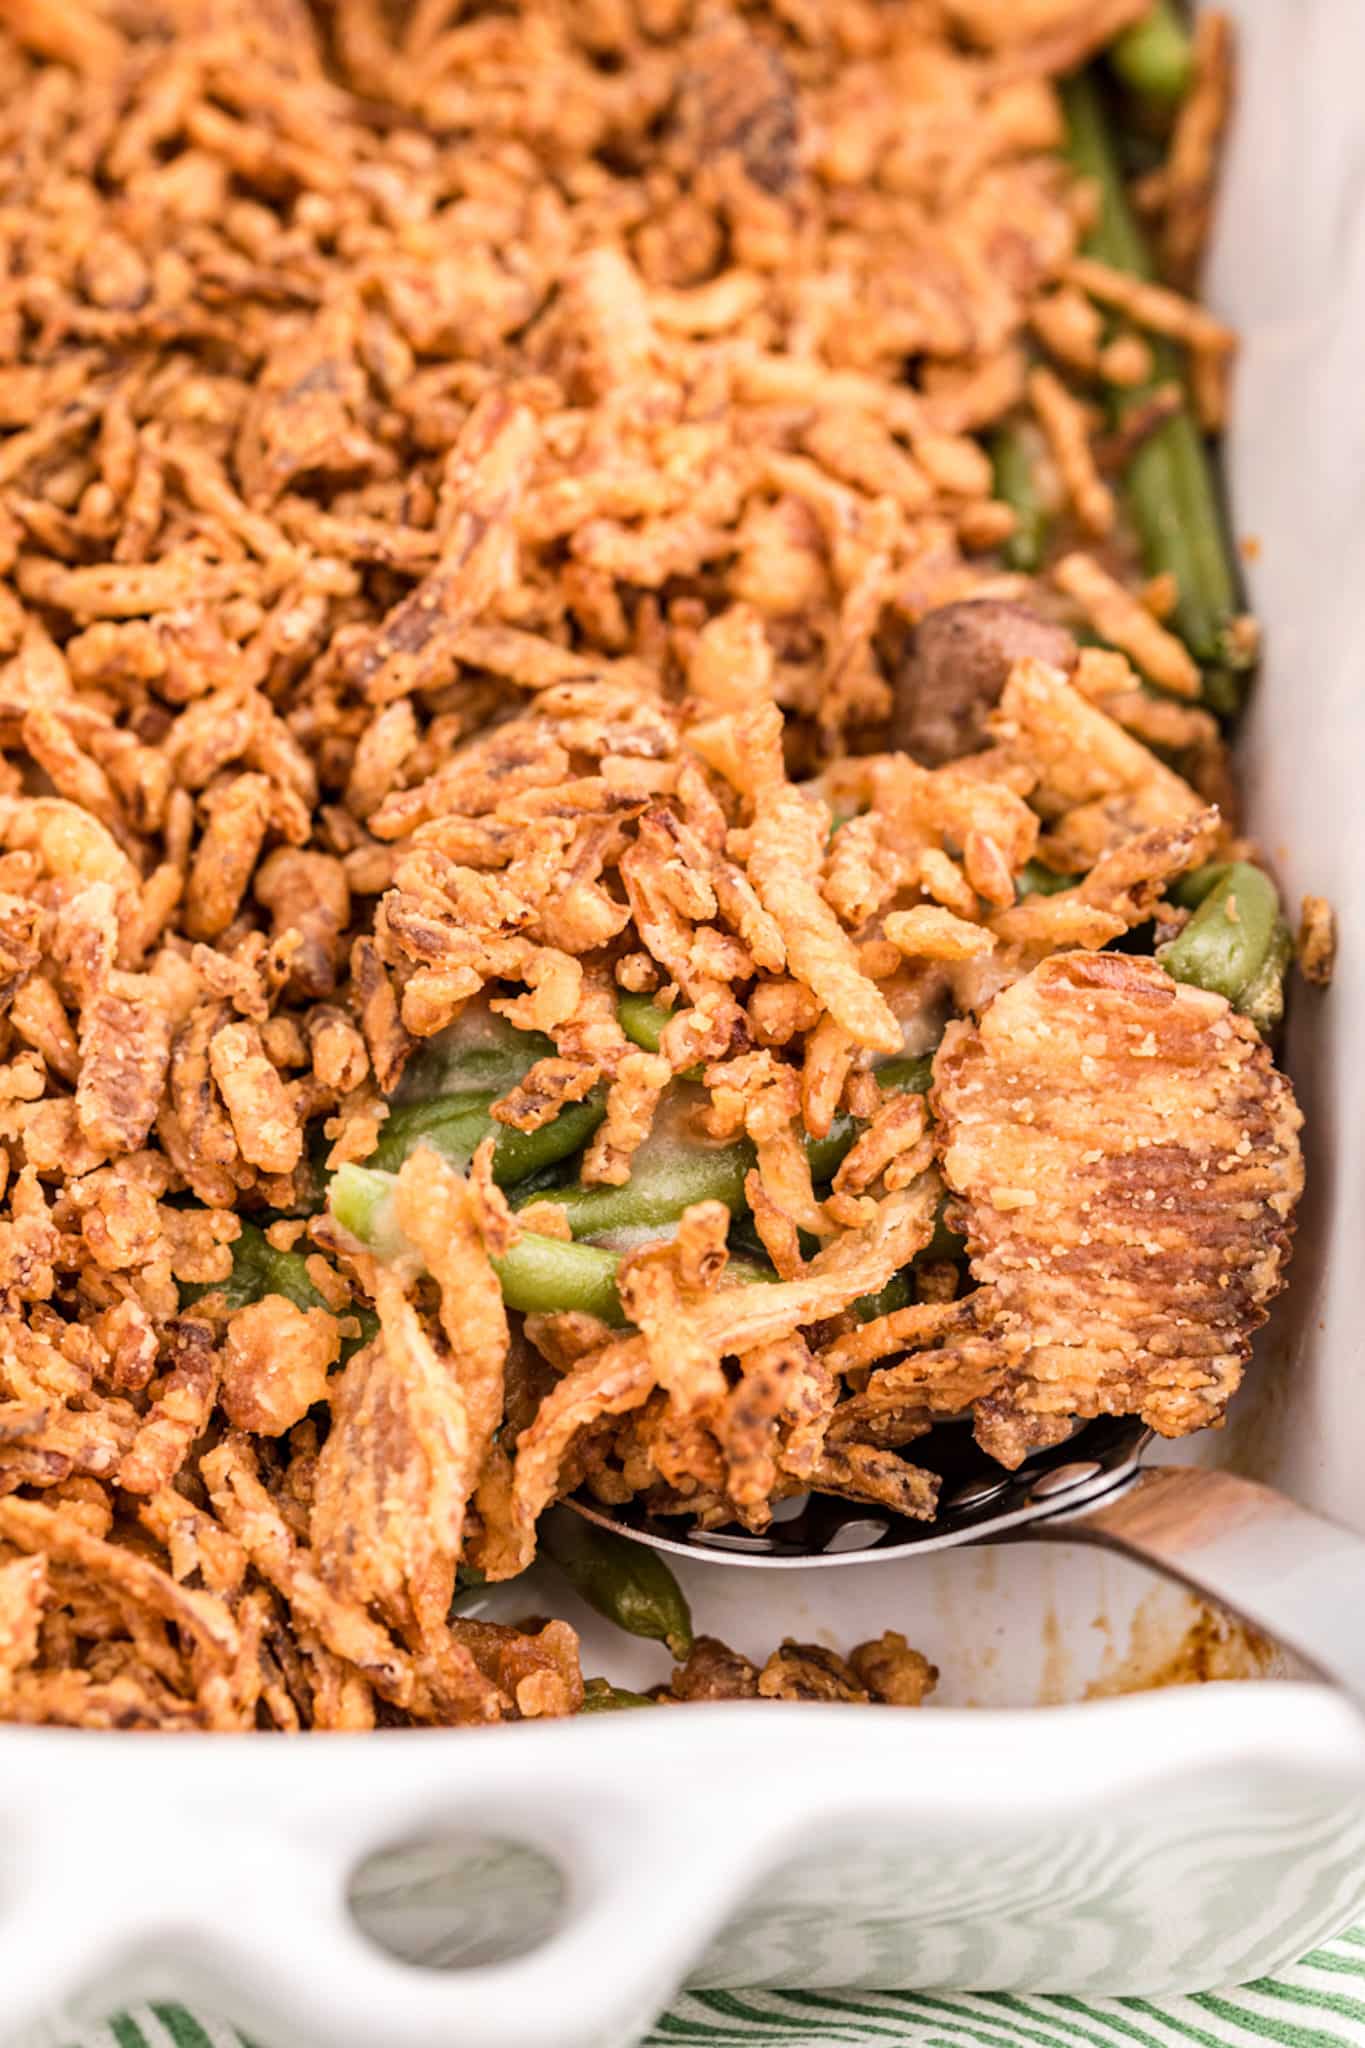 green bean casserole with serving spoon.